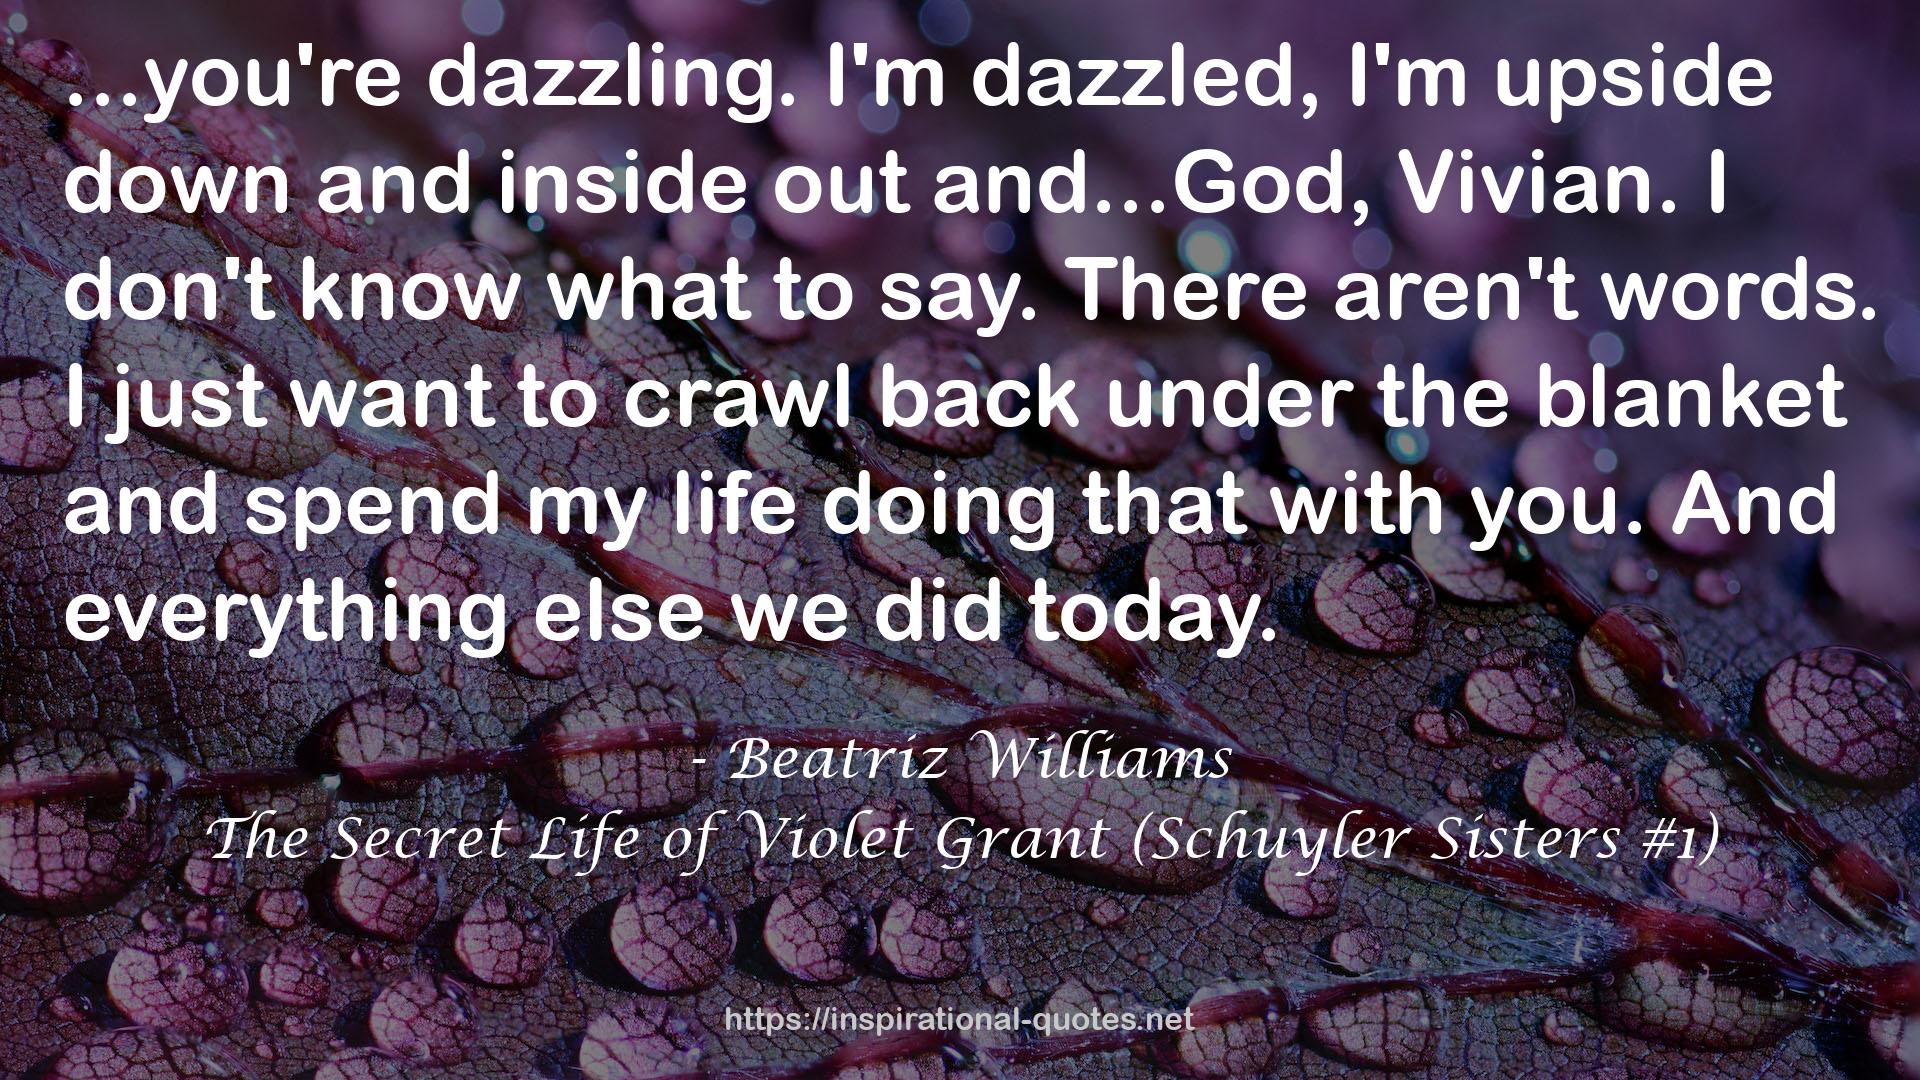 The Secret Life of Violet Grant (Schuyler Sisters #1) QUOTES